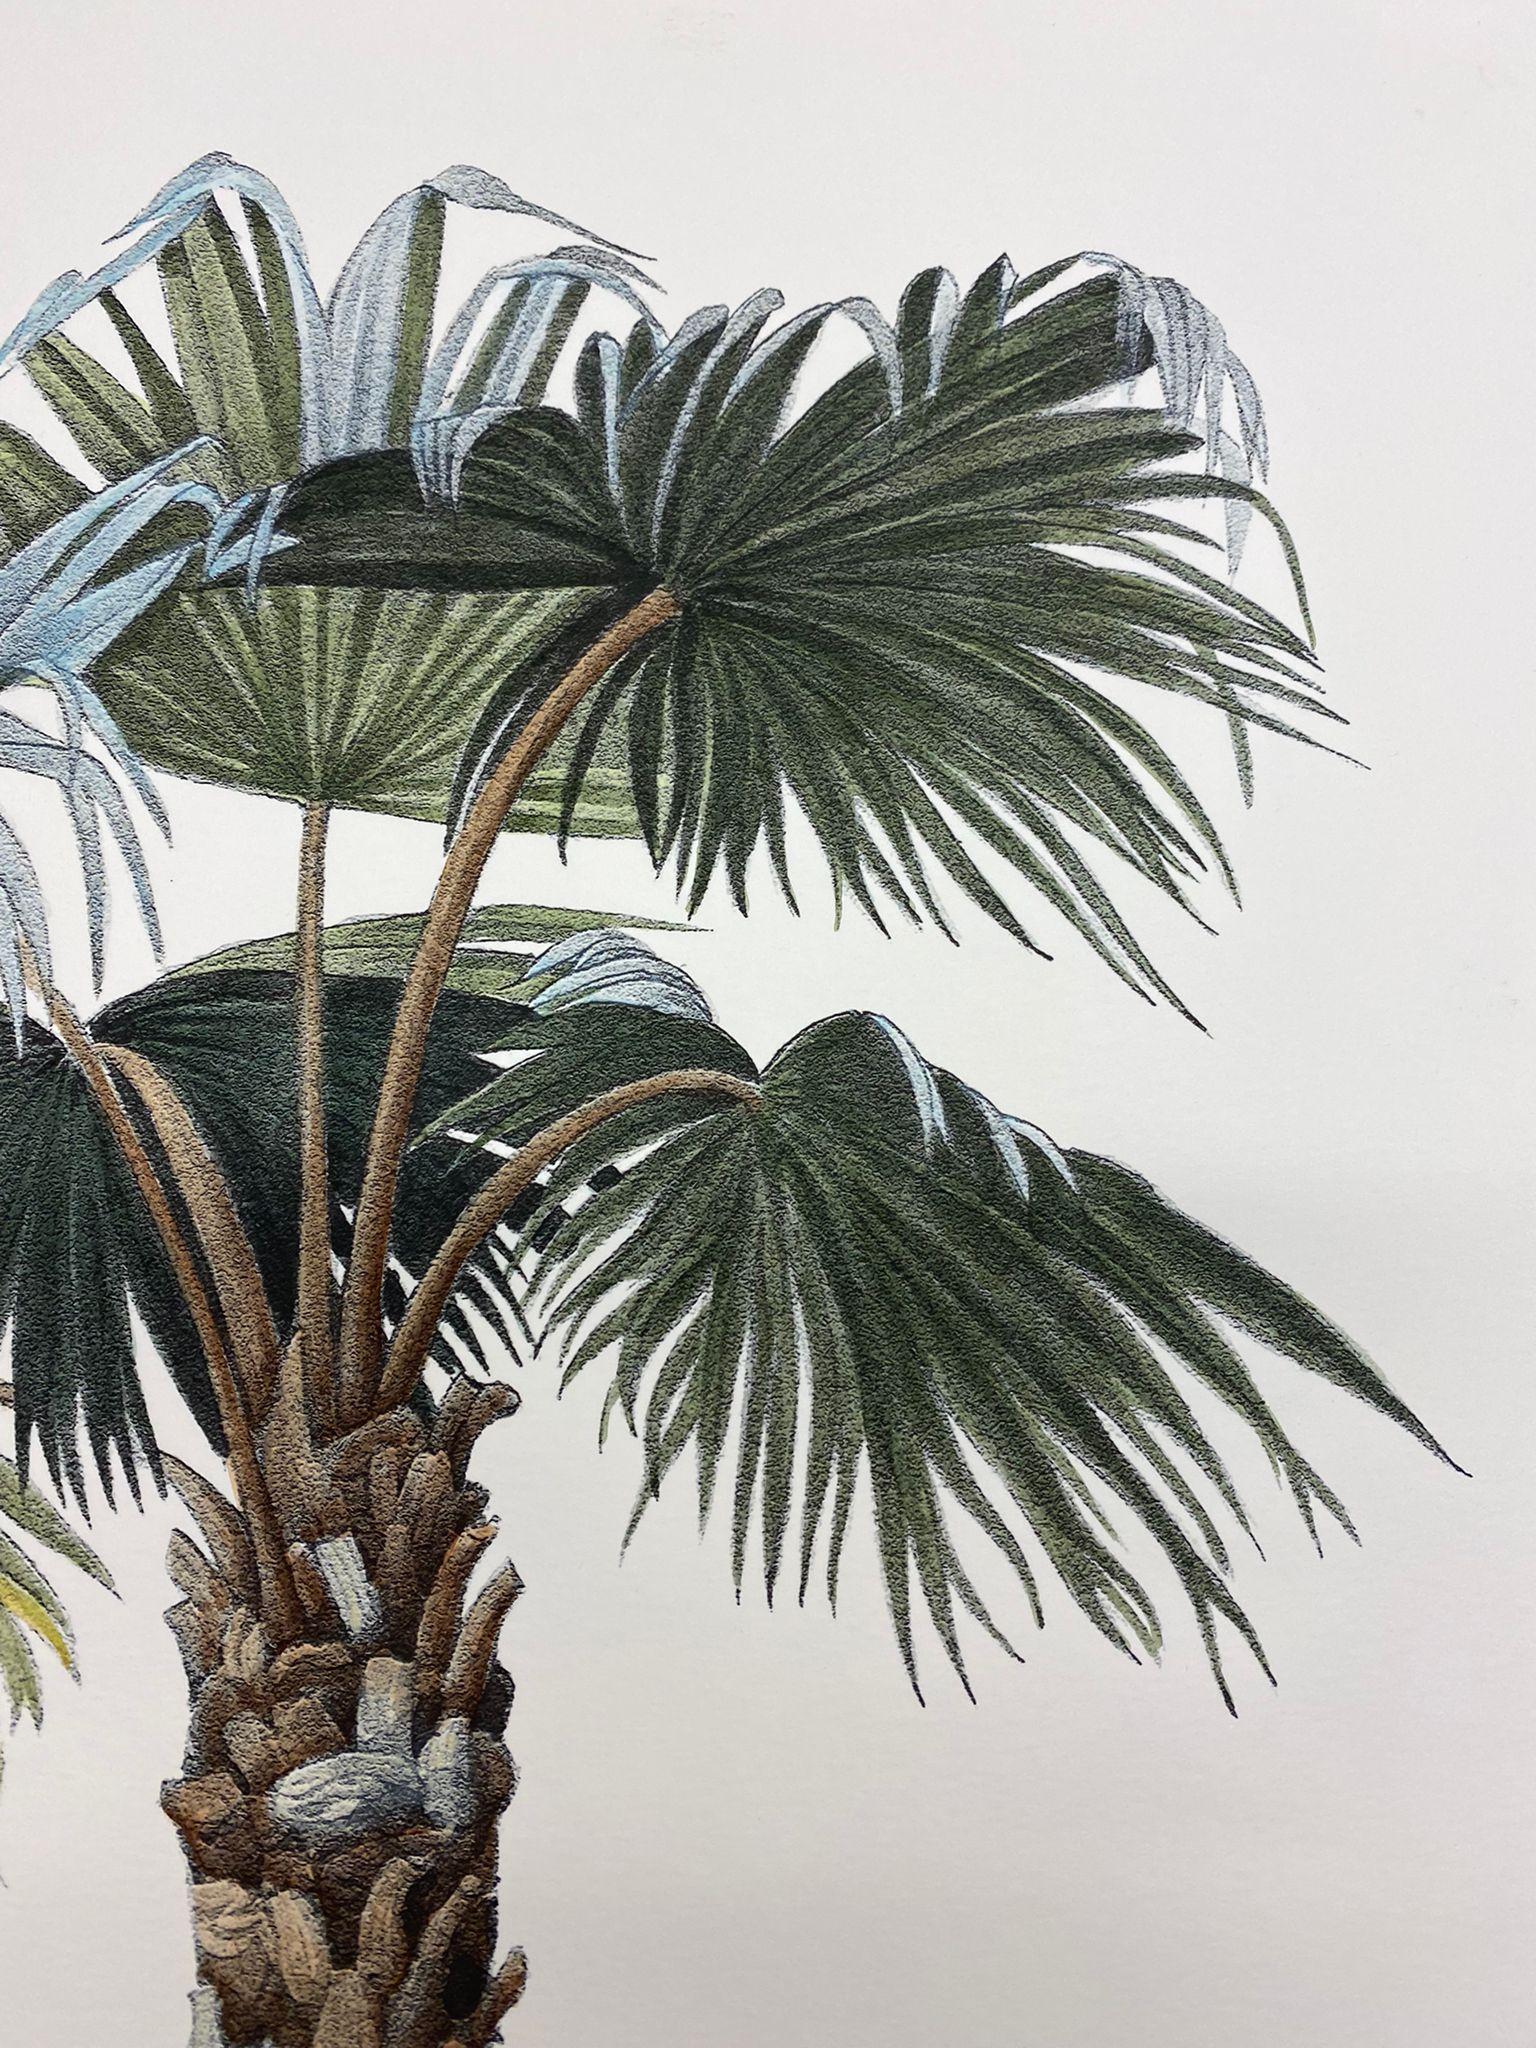 Elegant hand-watercoloured print representing Butia Capitata, of the palms family.

This botanical style print is available in 4 different natural representations to create a bright and joyful composition:
- Musa Paradisiaca
- Butia Capitata
-